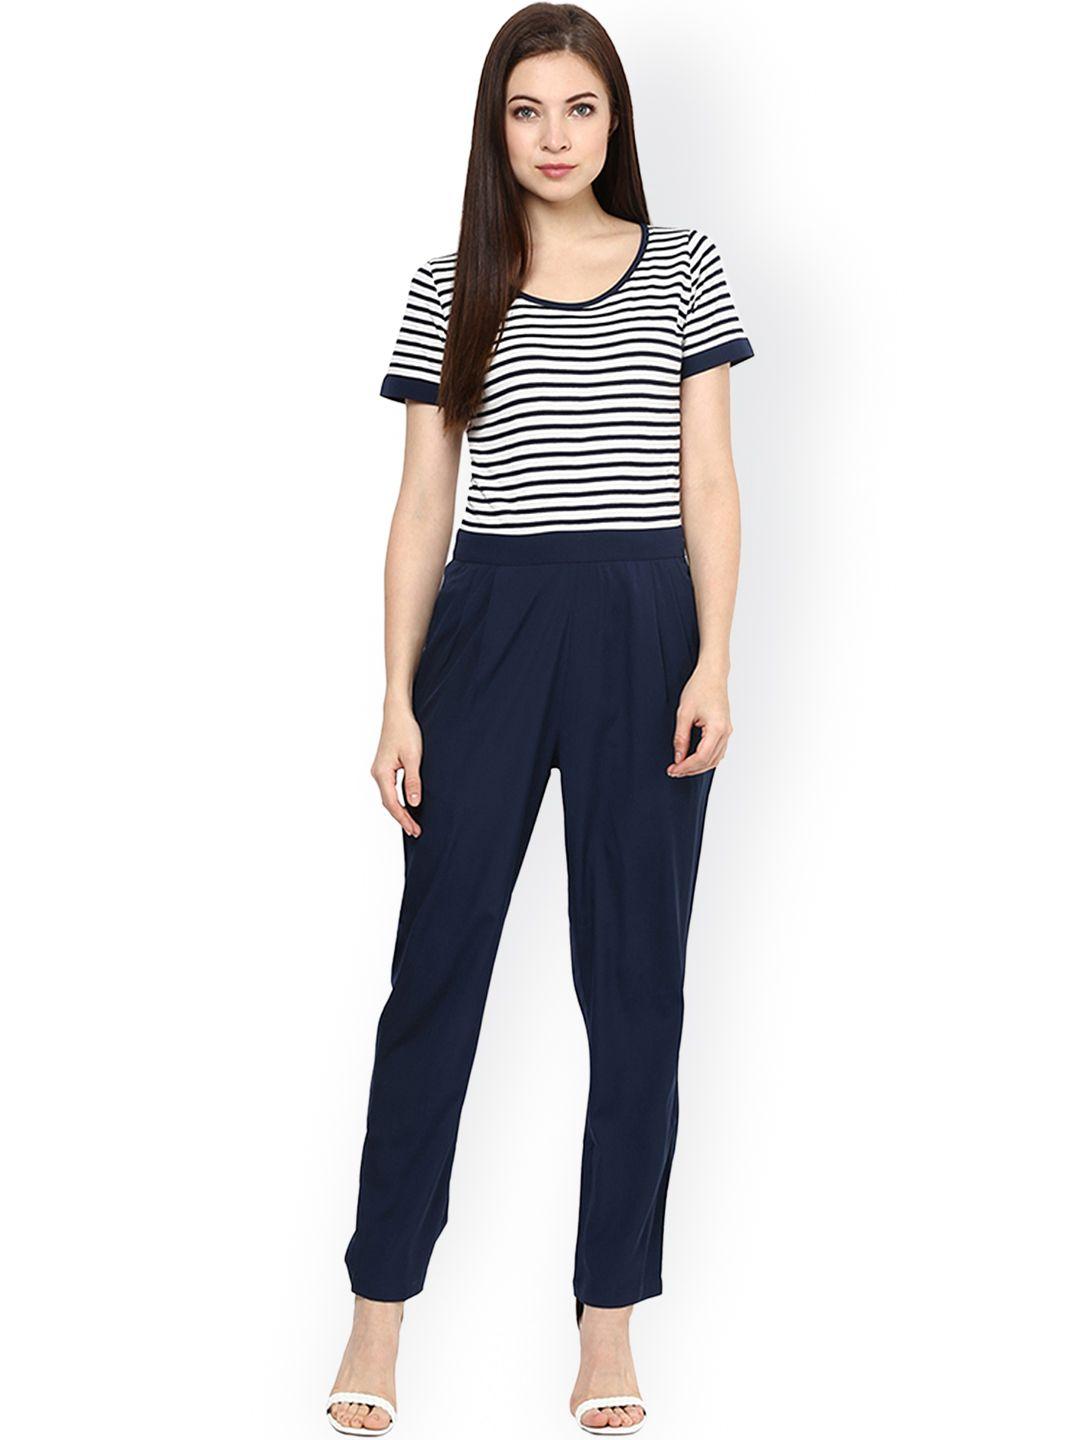 magnetic designs women navy & white striped jumpsuit